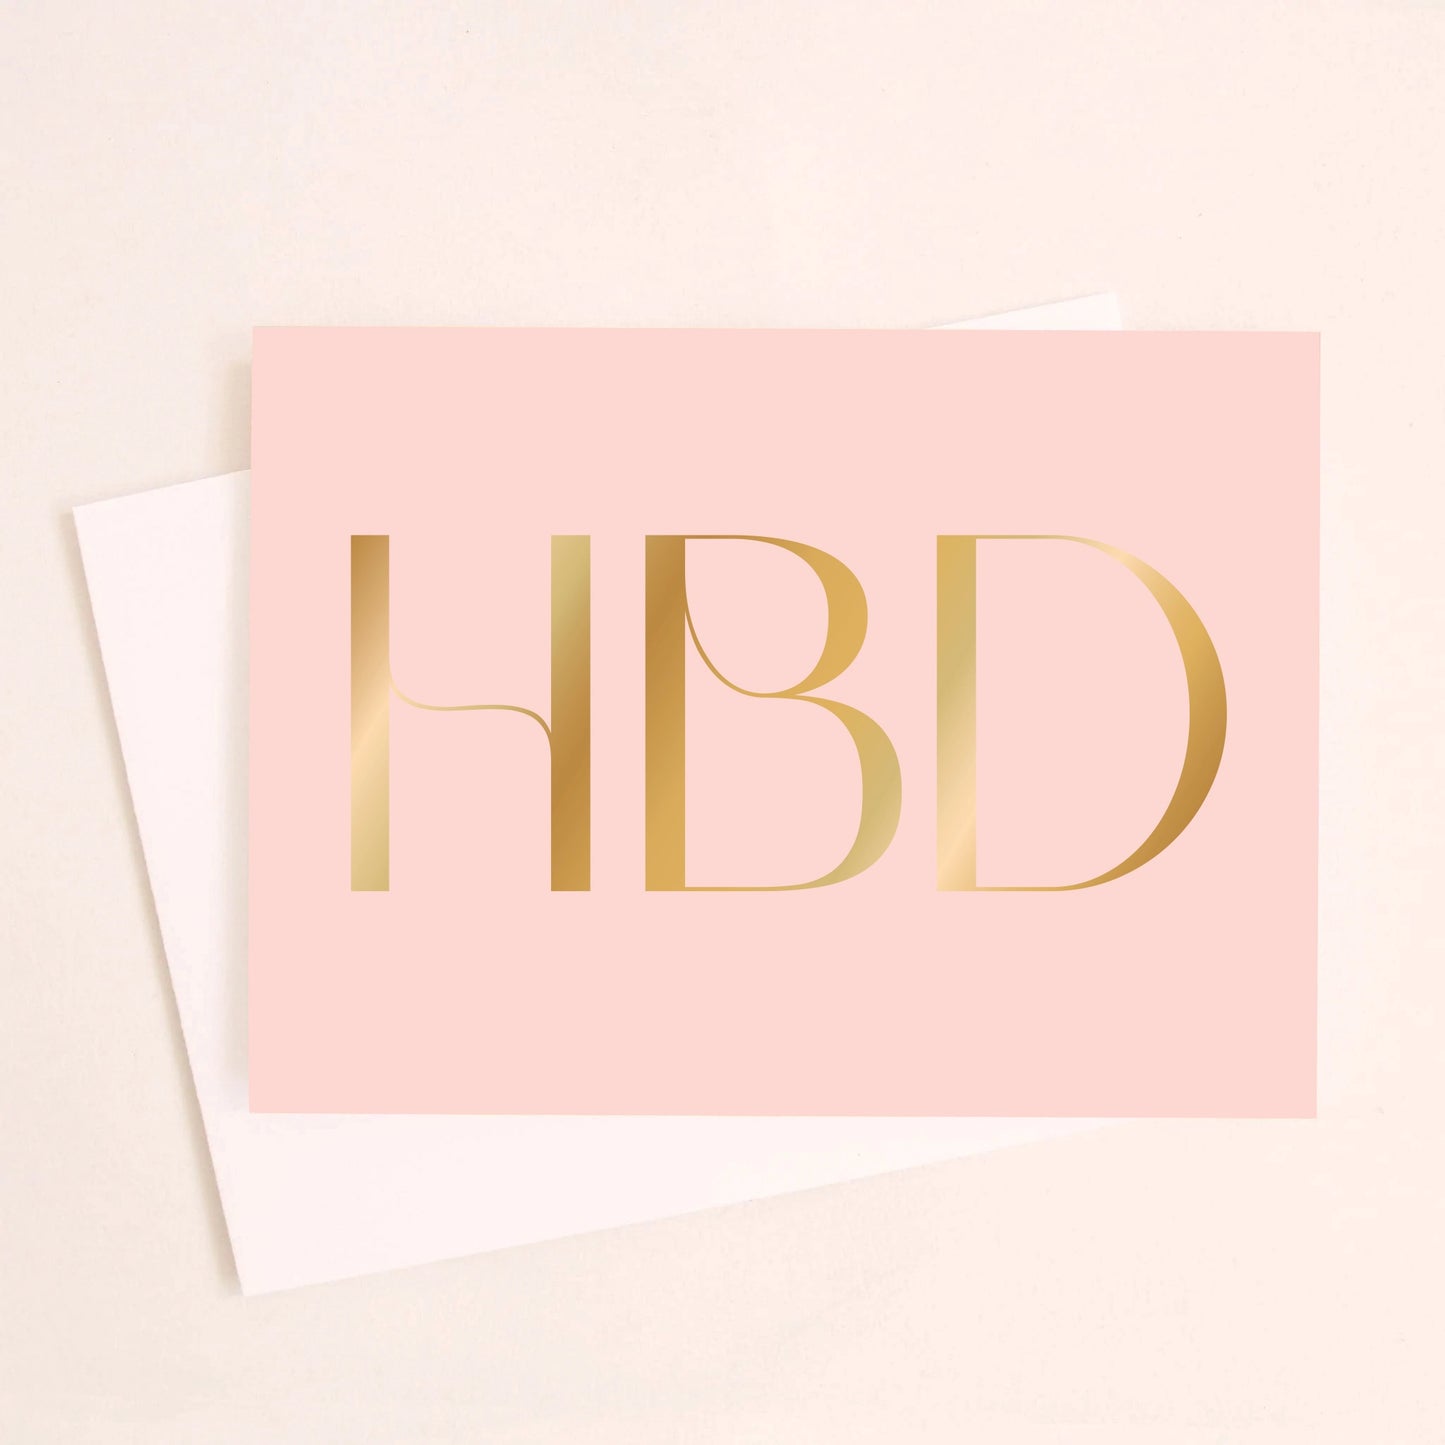 On an ivory background is a light pink greeting card with large gold foil text in the center that reads, "HBD" in all caps. Also included is a white envelope. 